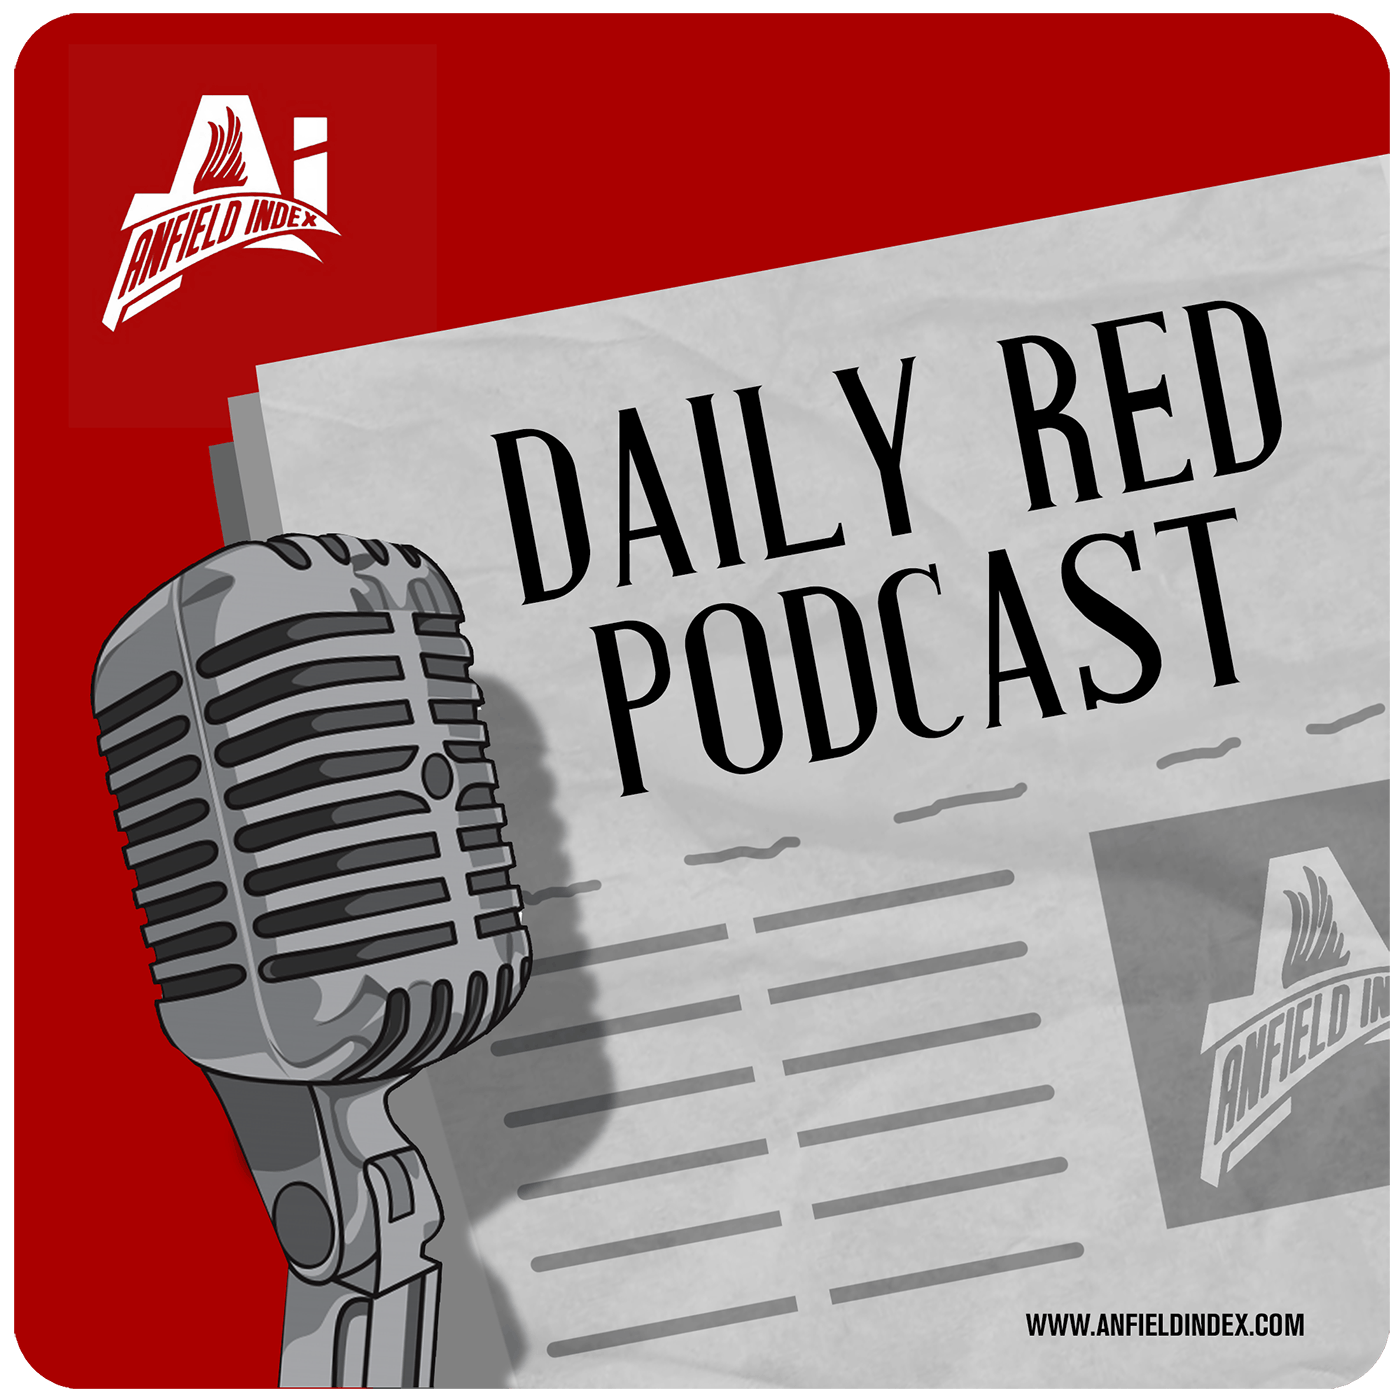 Last Min News Ahead of LASK - Daily Red Podcast